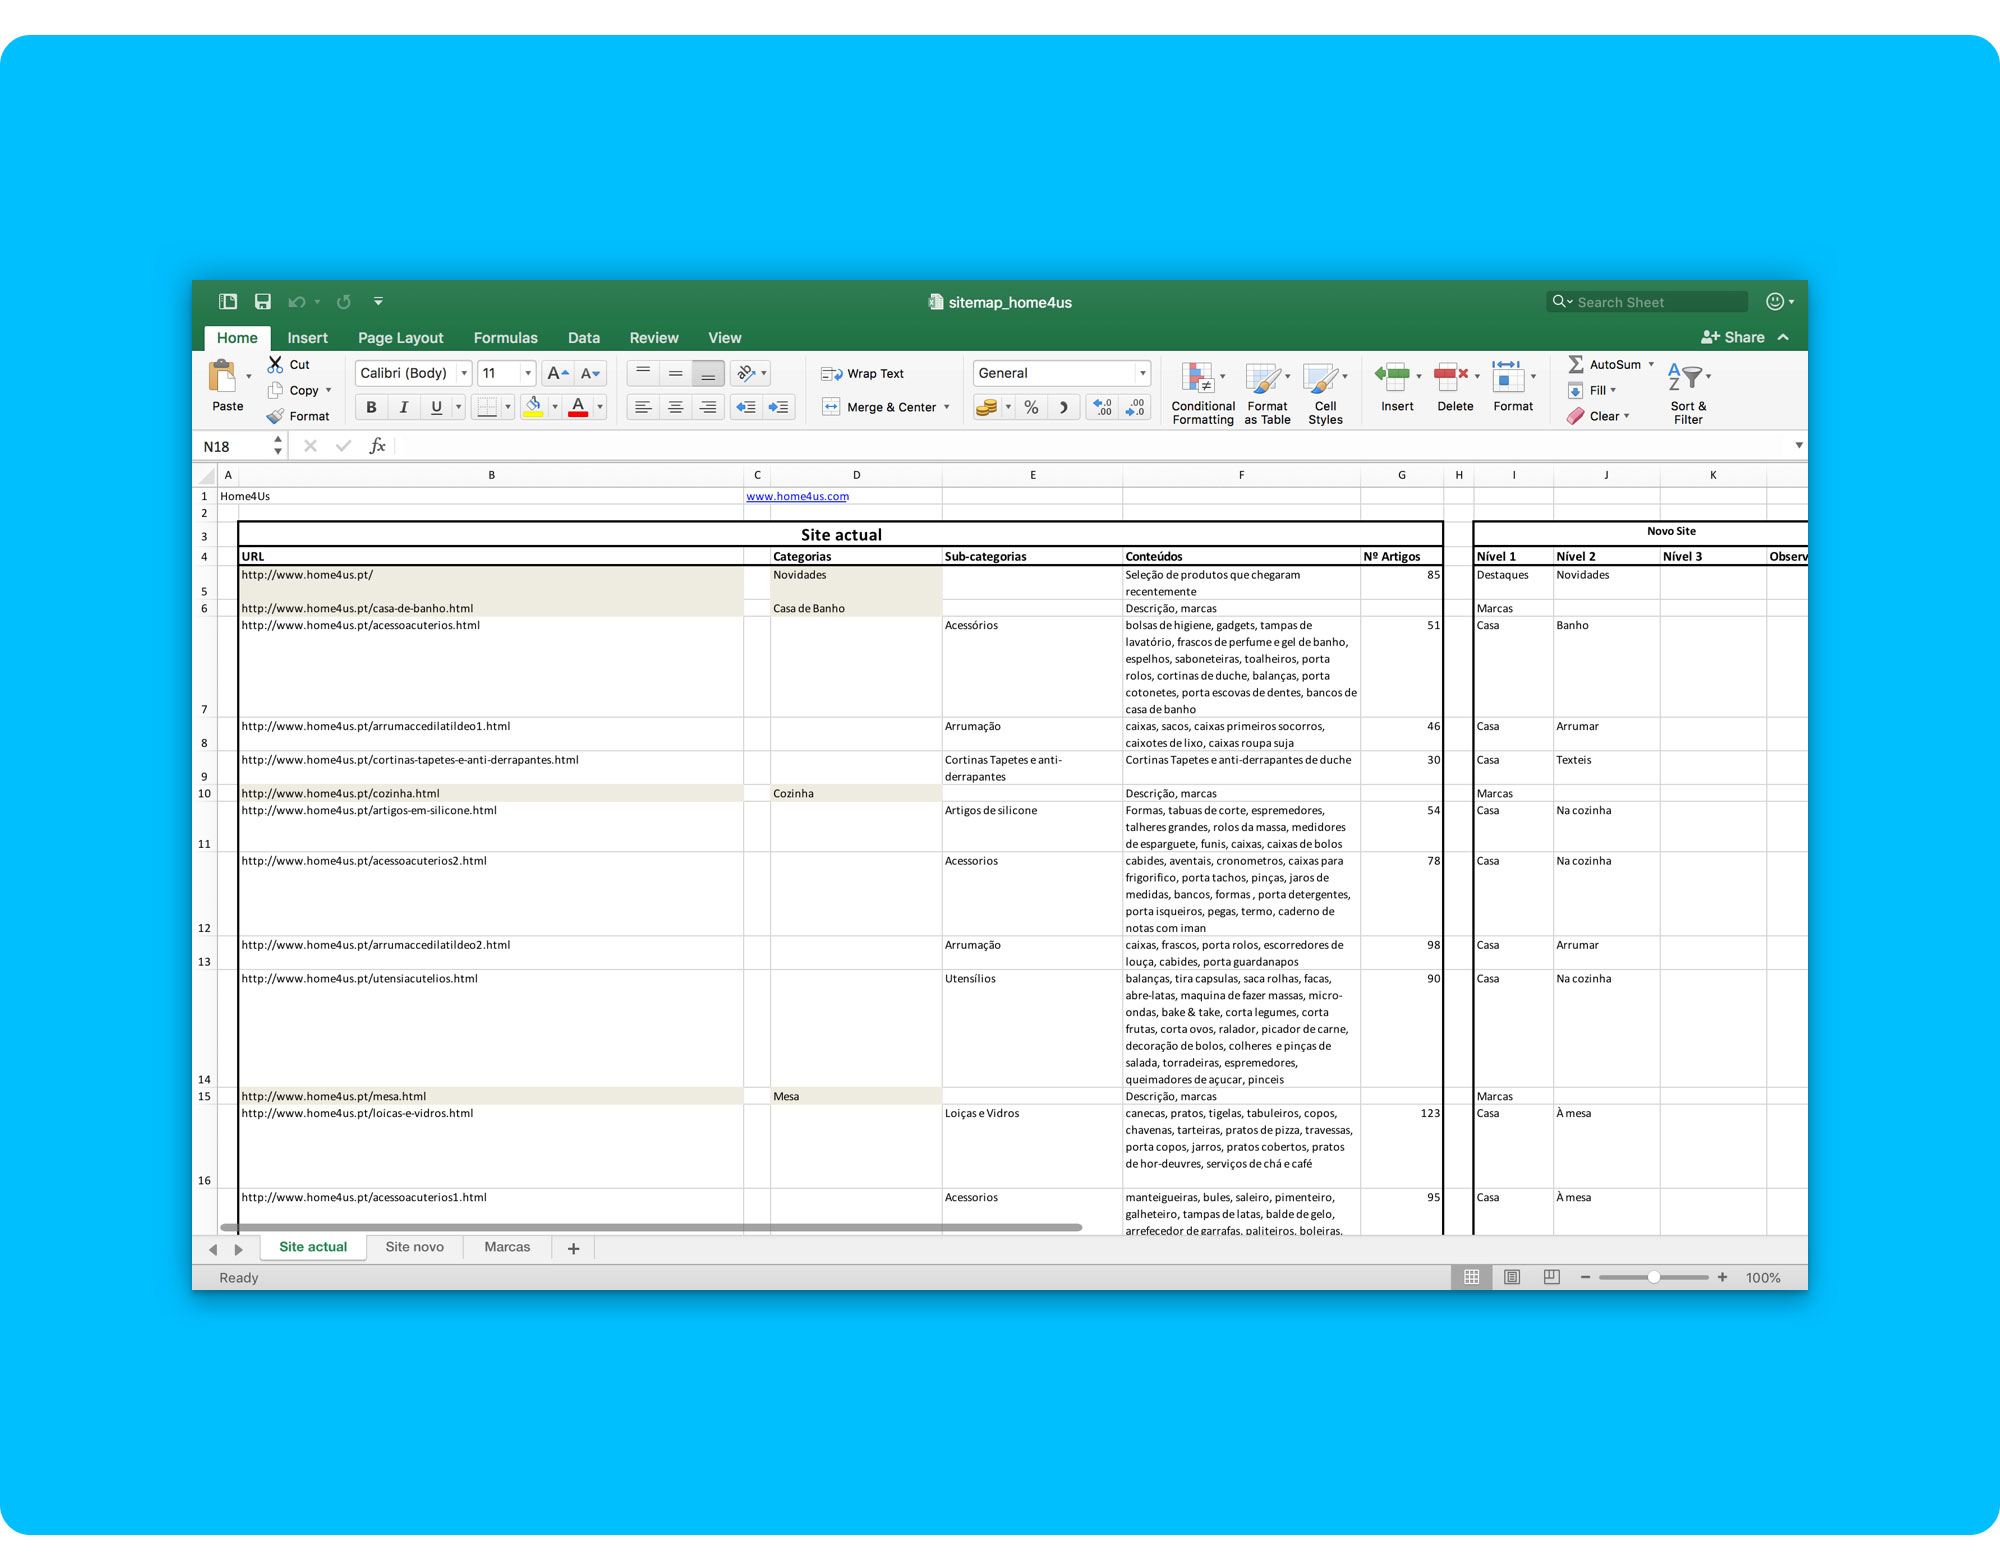 Excel spreadsheet with the old information architecture